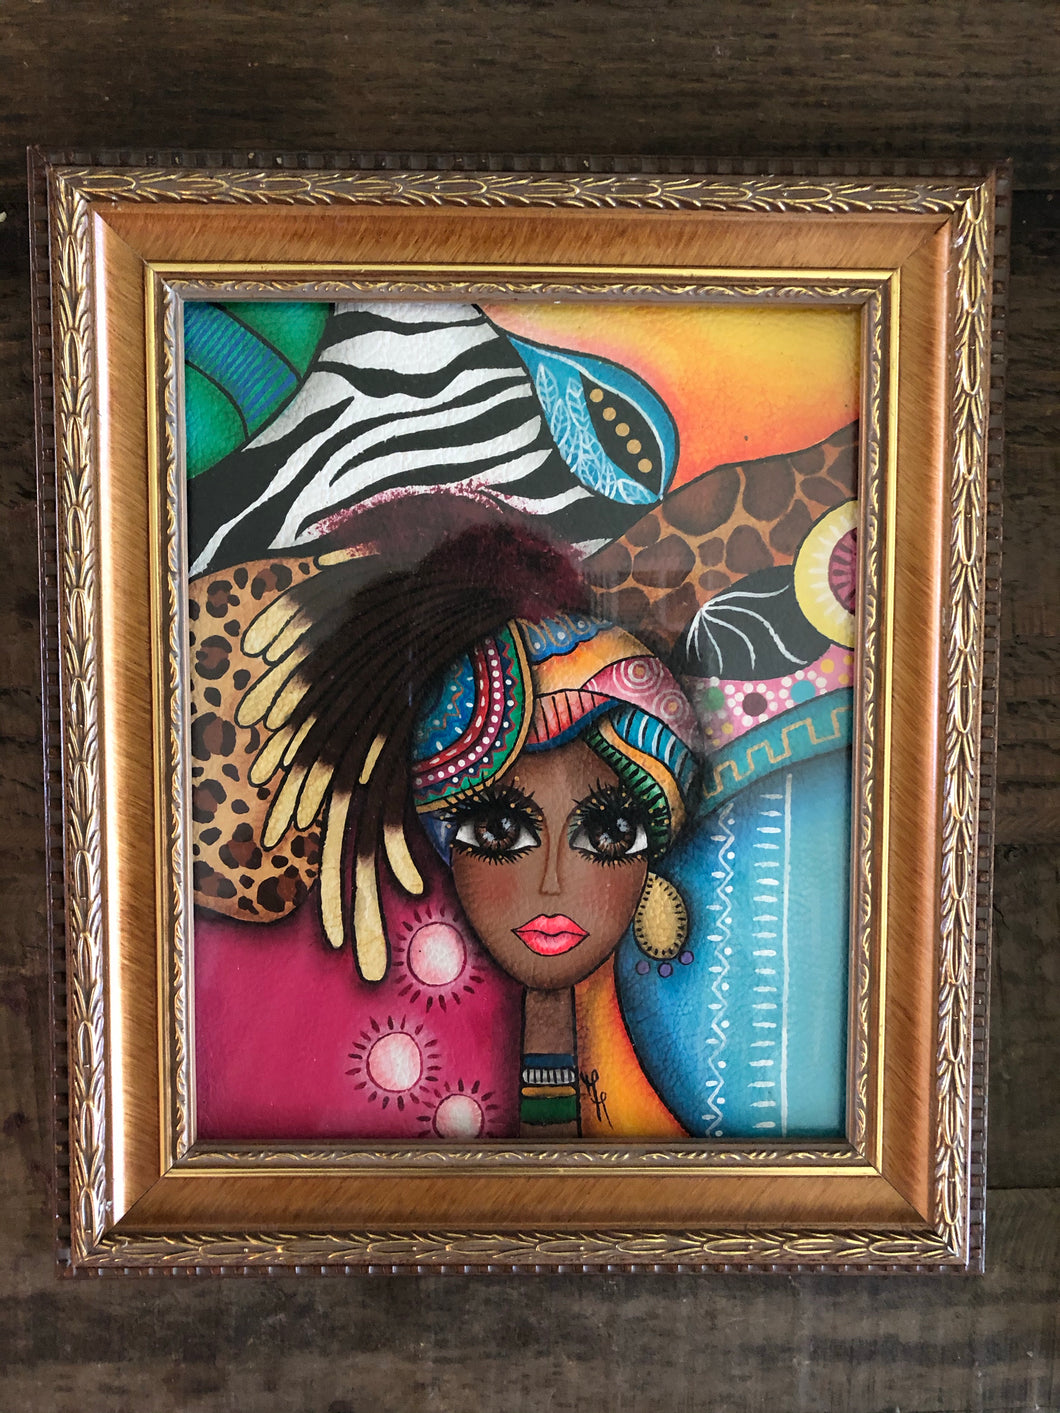 African Painting - Watercolor painting 8 x 10